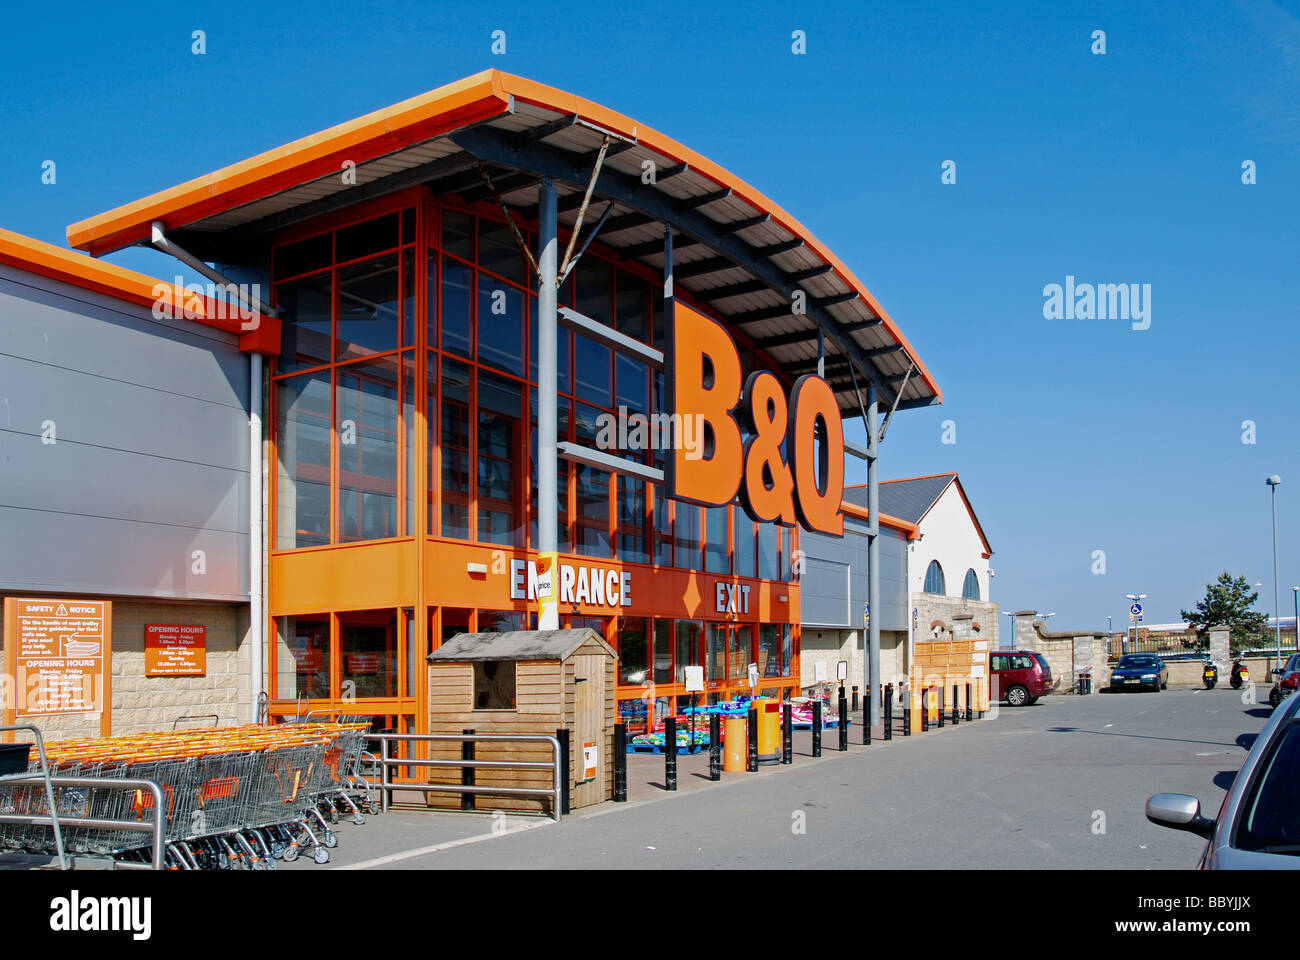 the entrance to b&q diy superstore at pool near redruth in cornwall,uk Stock Photo